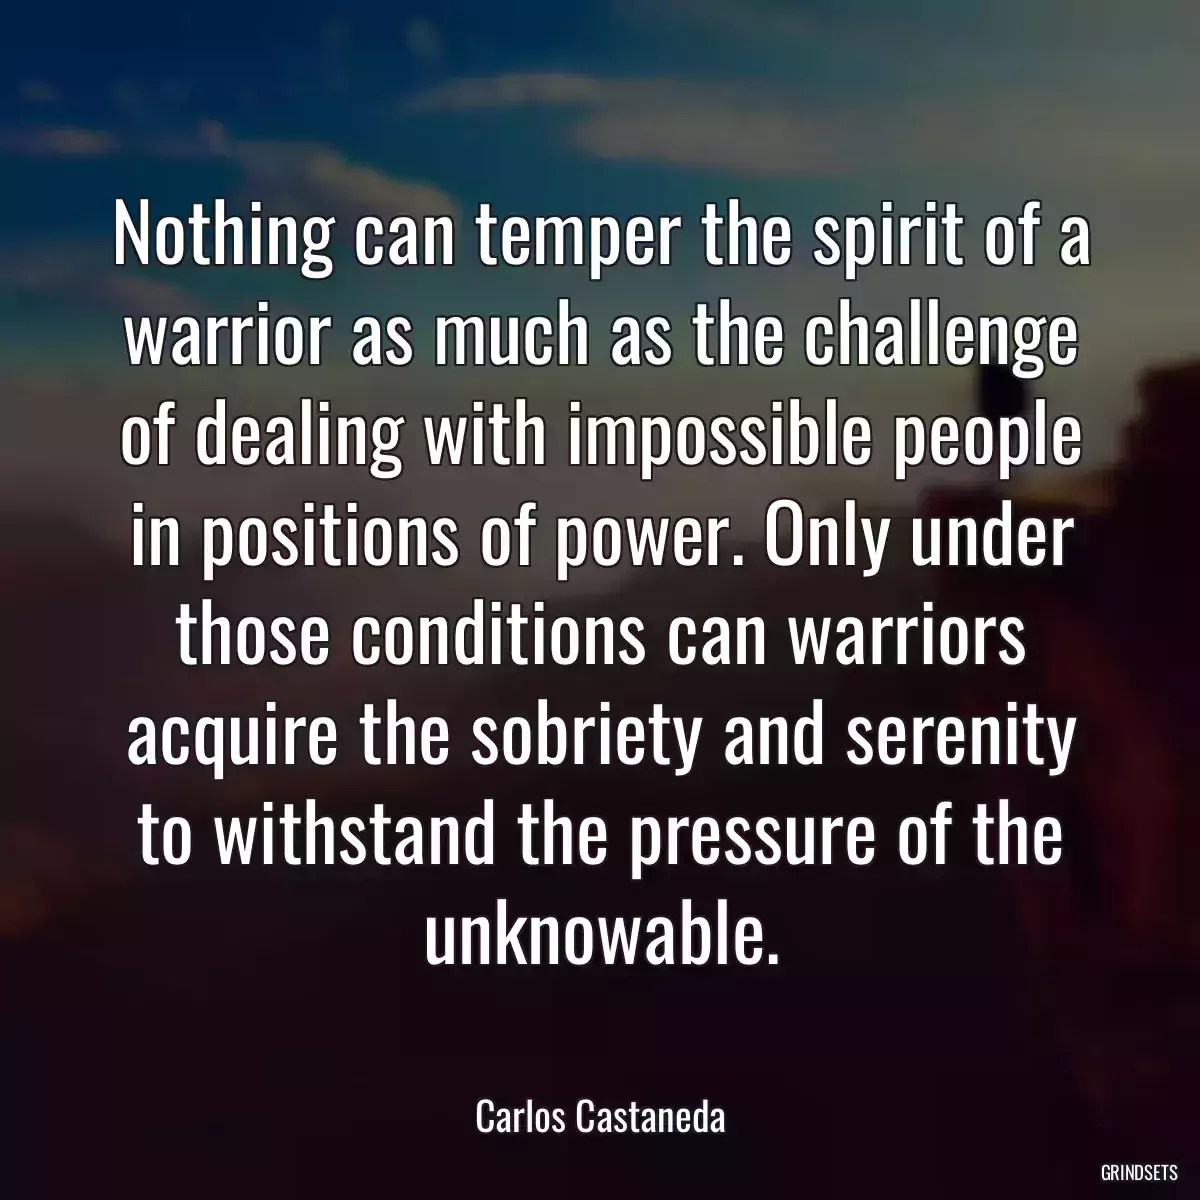 Nothing can temper the spirit of a warrior as much as the challenge of dealing with impossible people in positions of power. Only under those conditions can warriors acquire the sobriety and serenity to withstand the pressure of the unknowable.